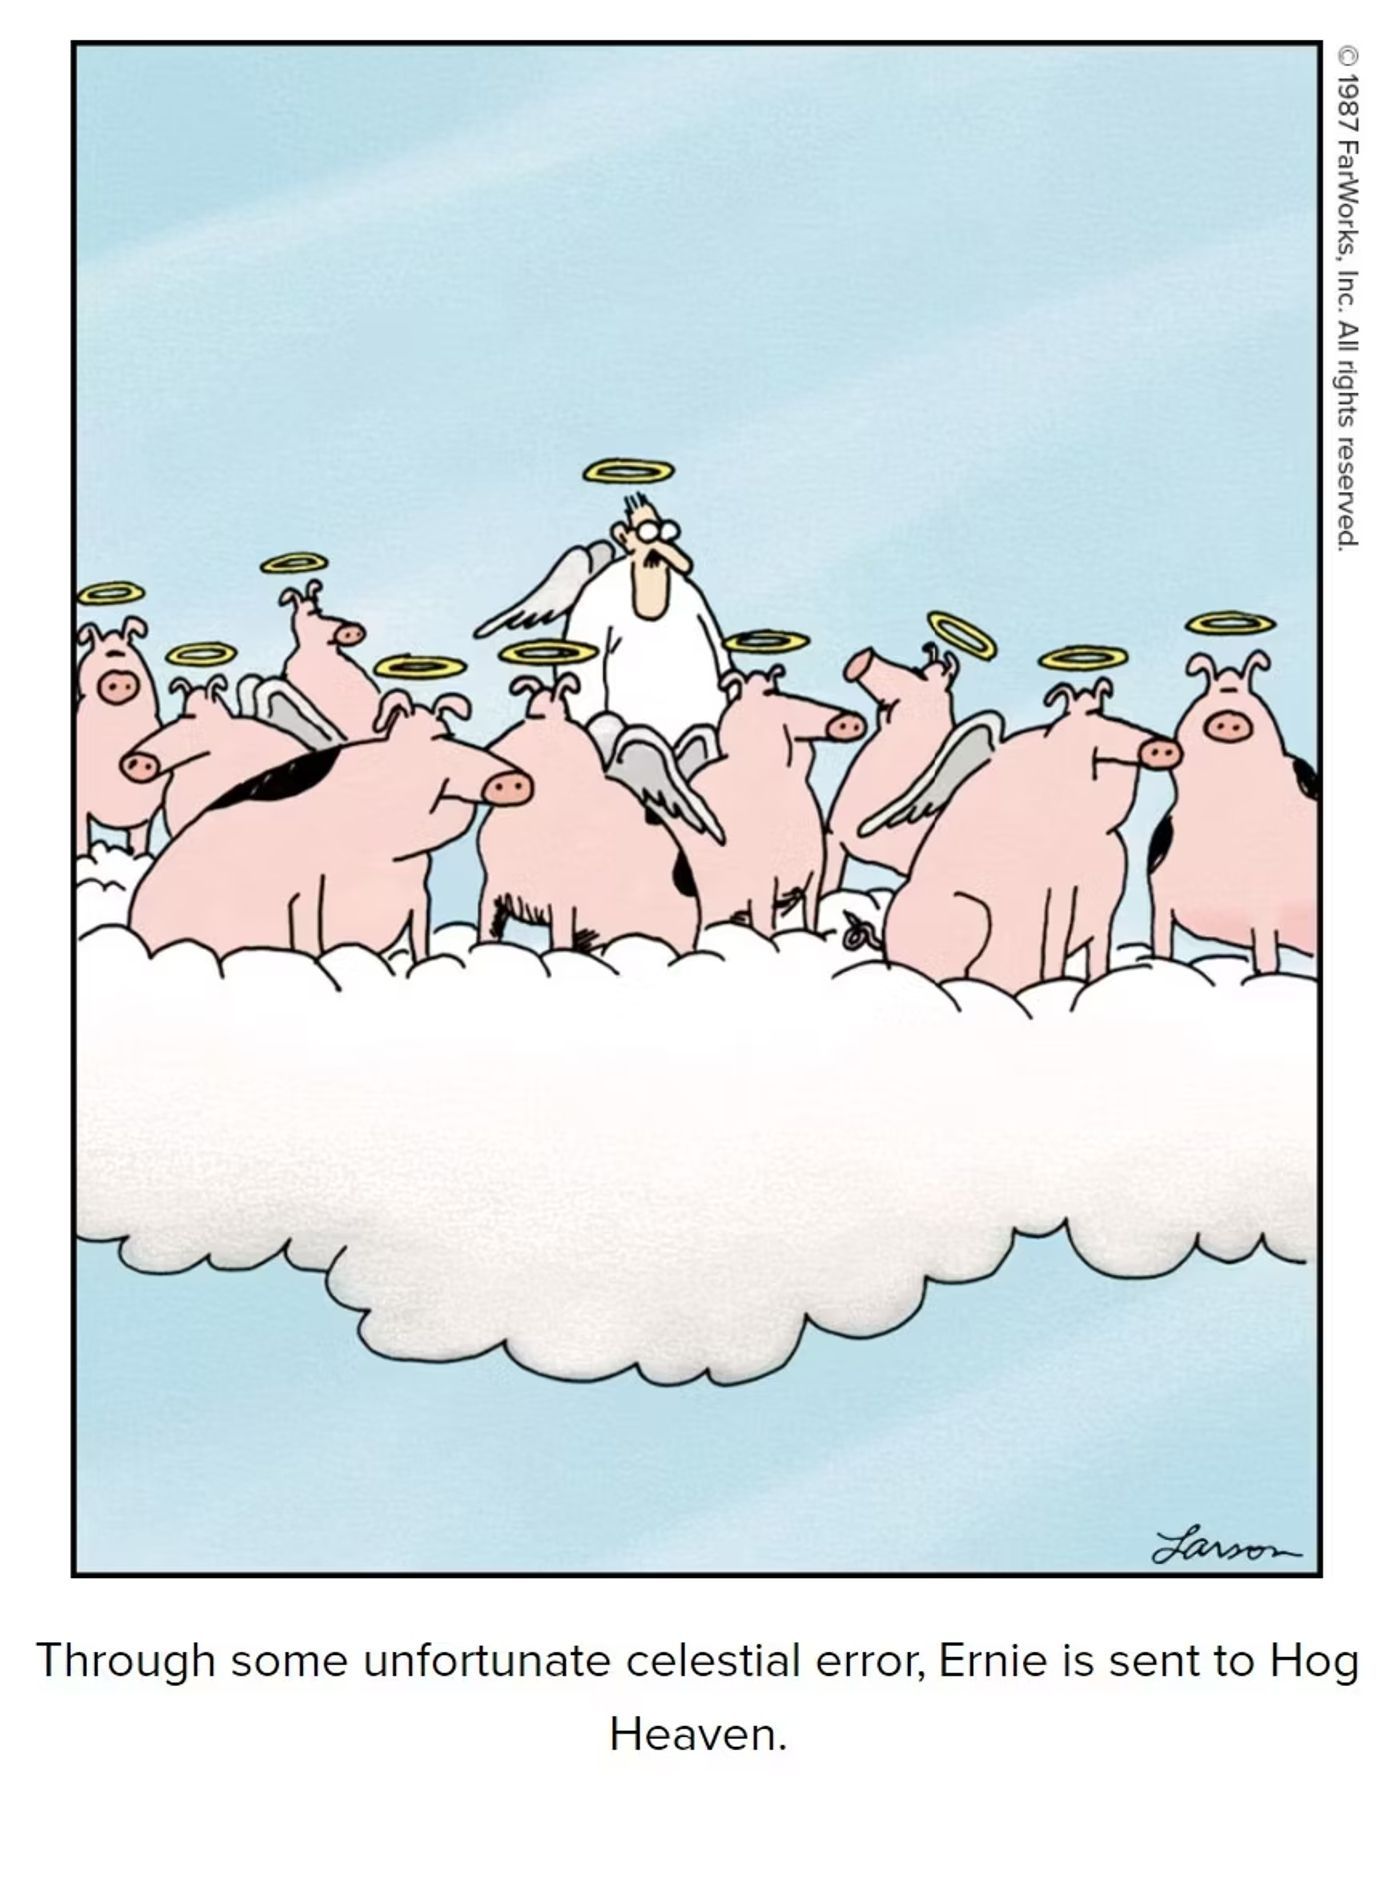 The Far Side comic featuring a man in heaven with pigs.